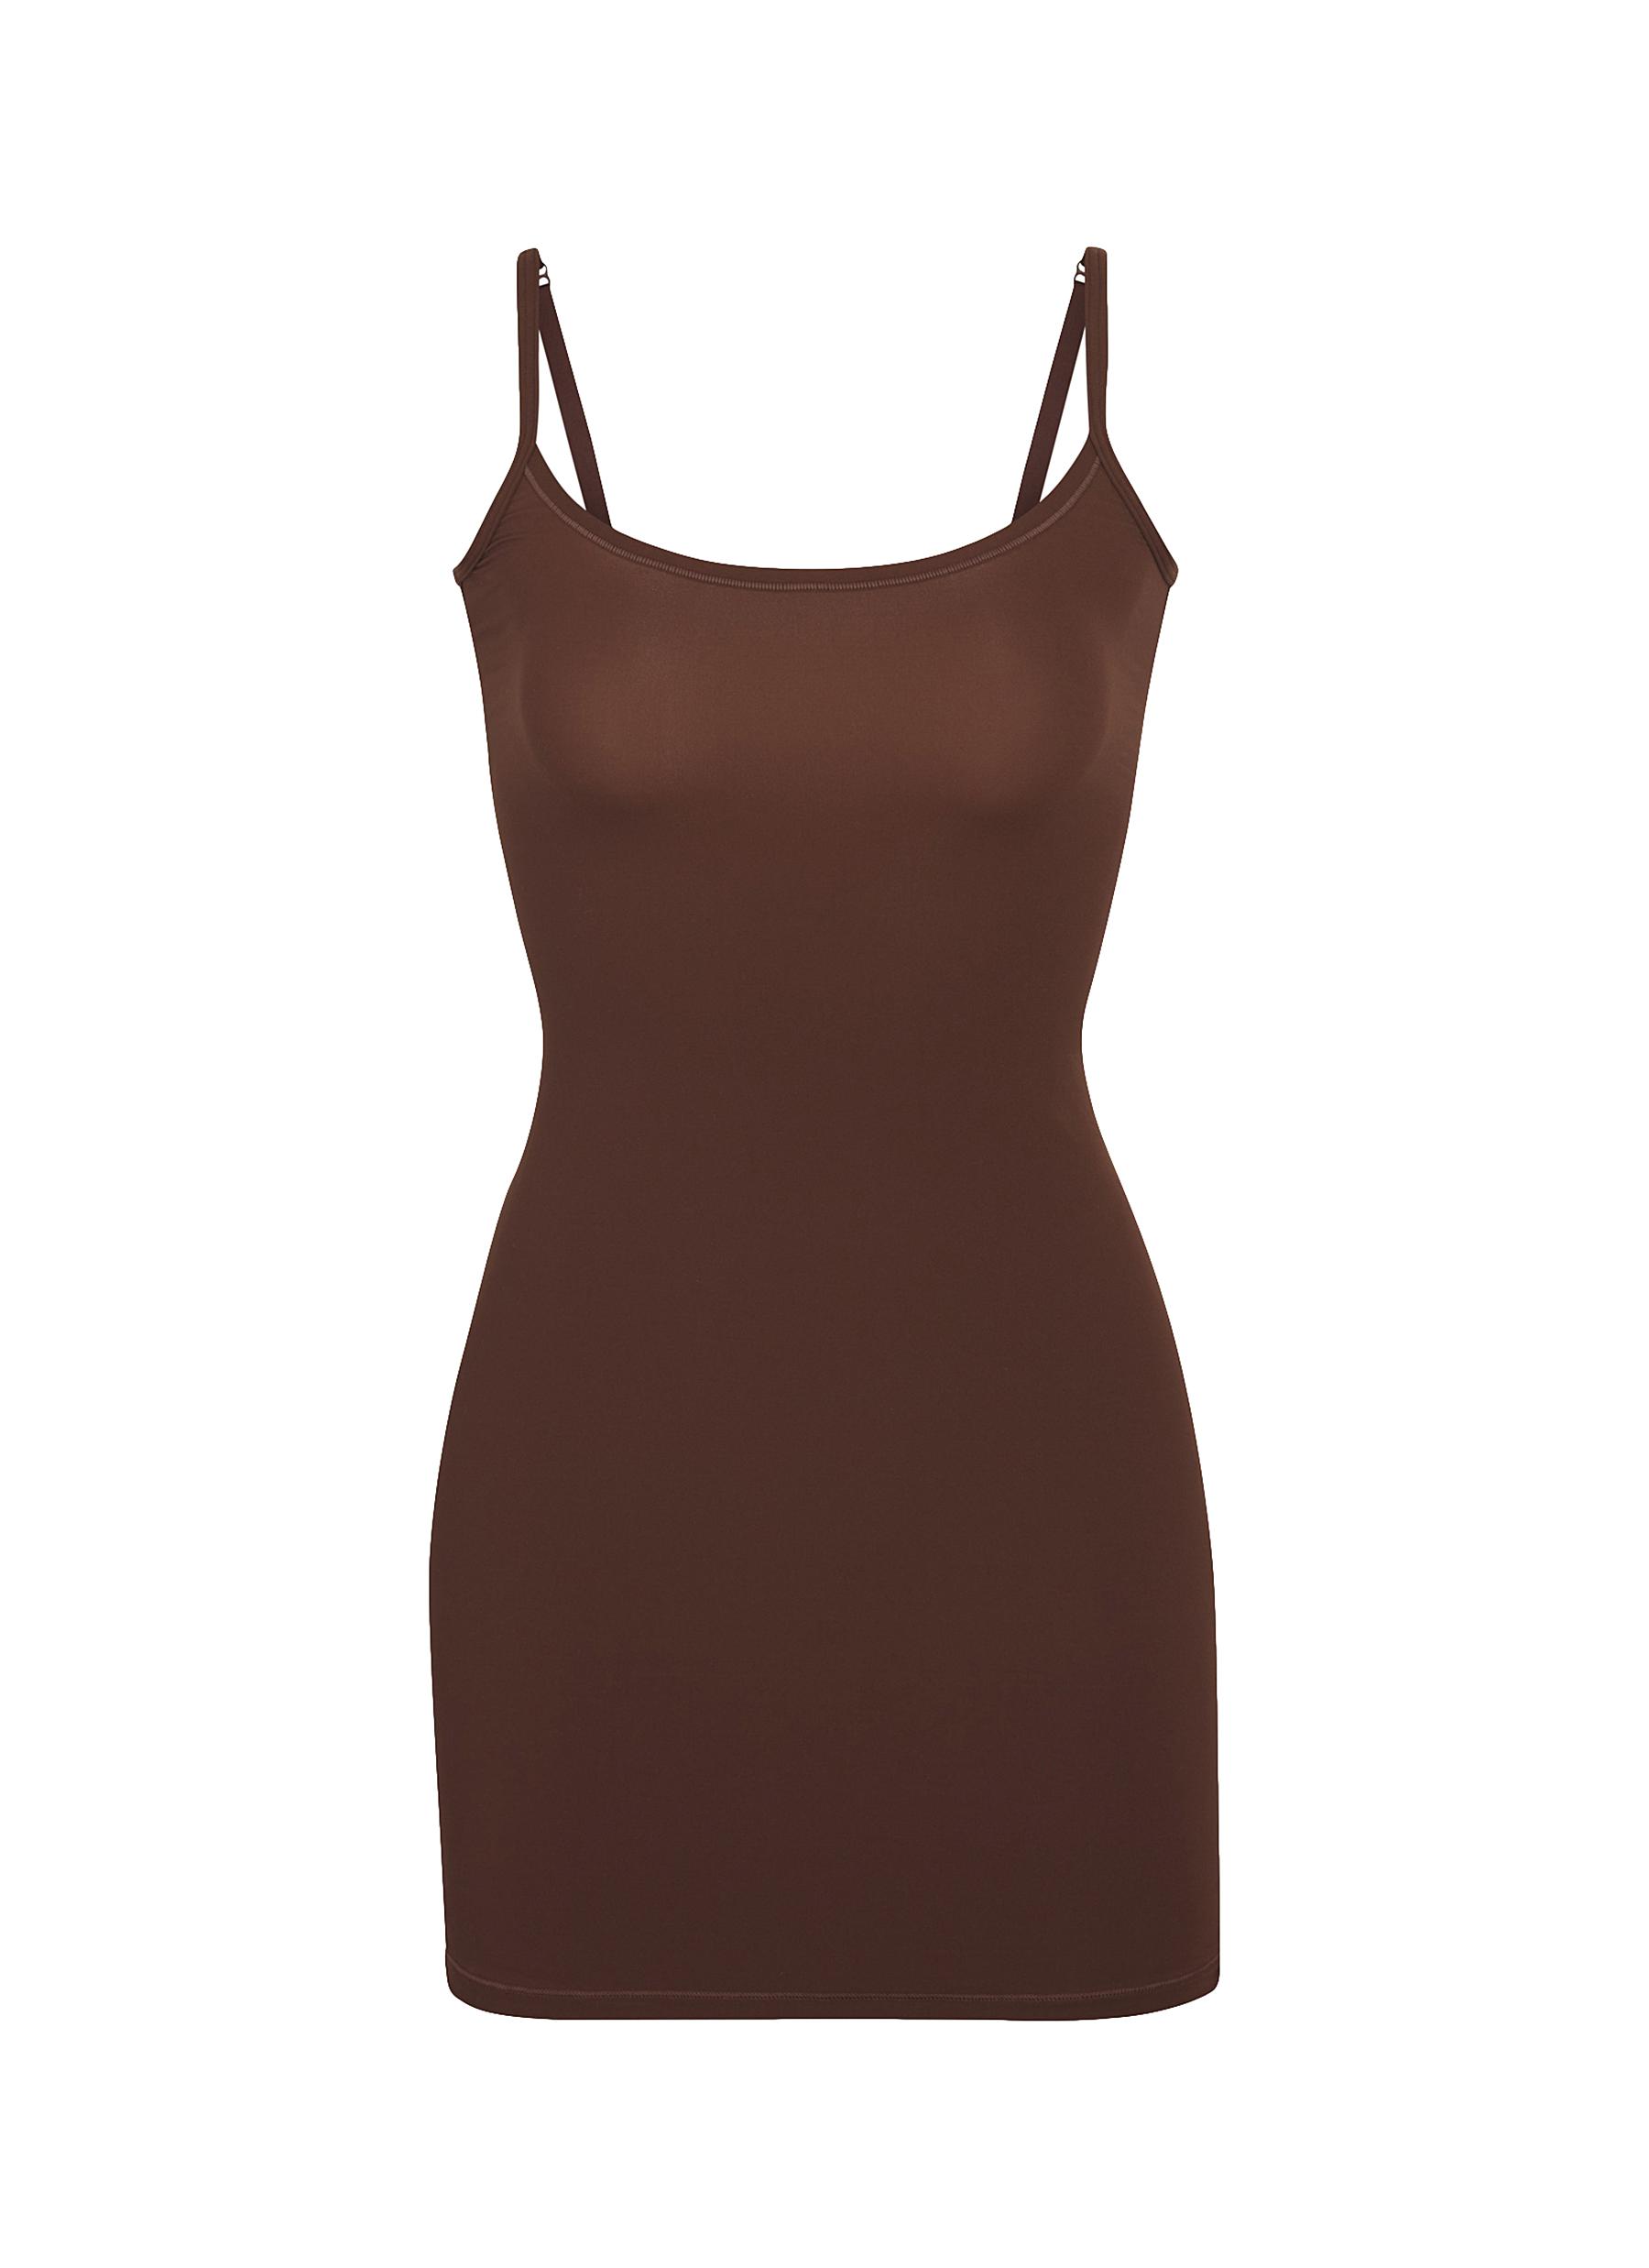 Brown Fits Everybody Maxi Dress by SKIMS on Sale